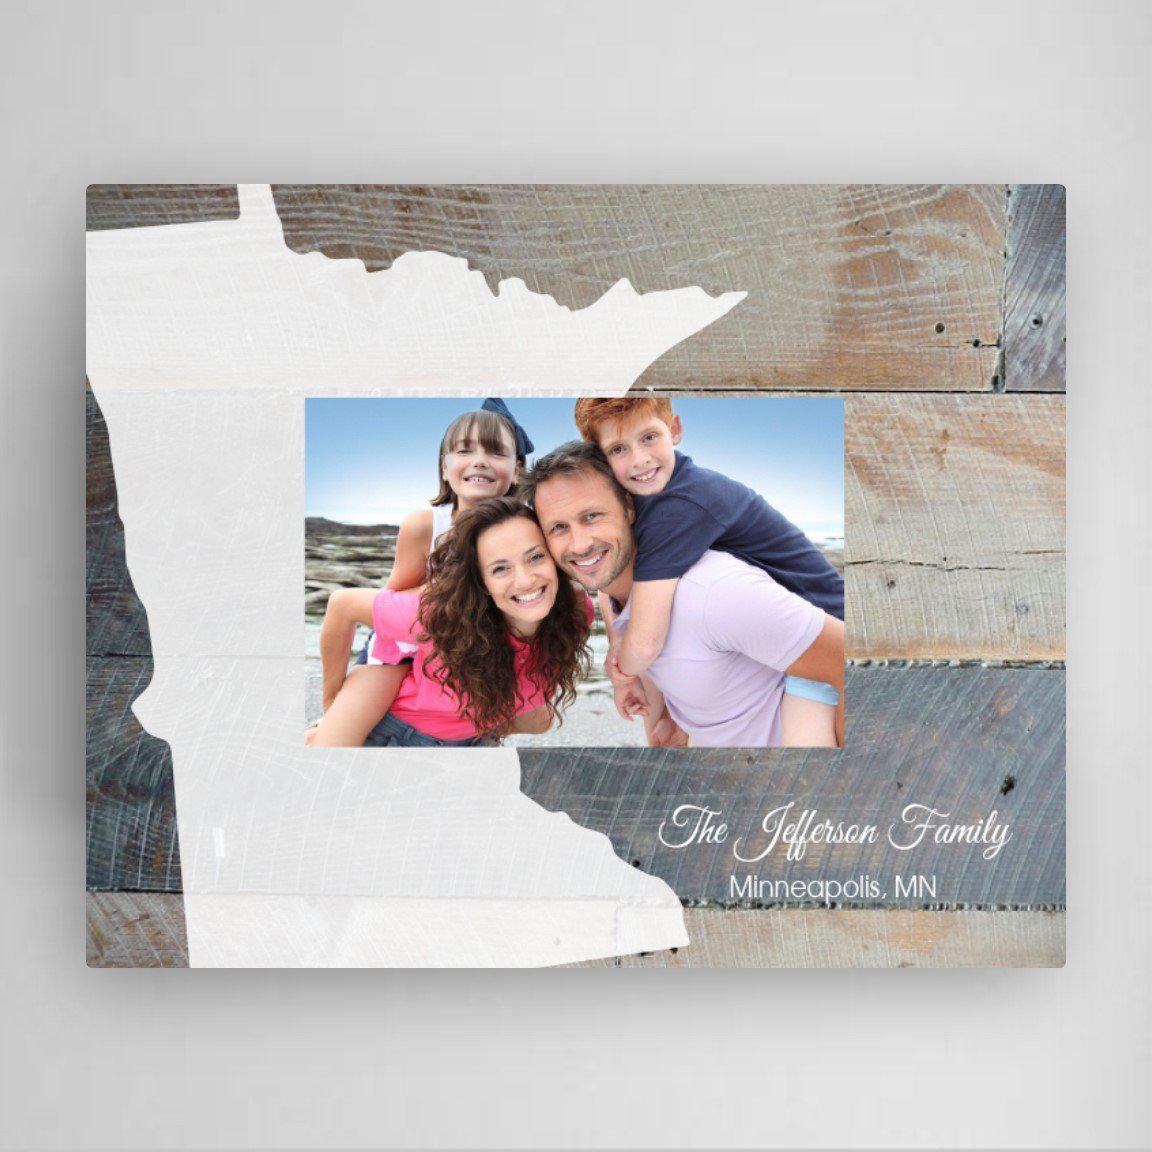 Personalized Picture Frames - Souvenir Home State Frame